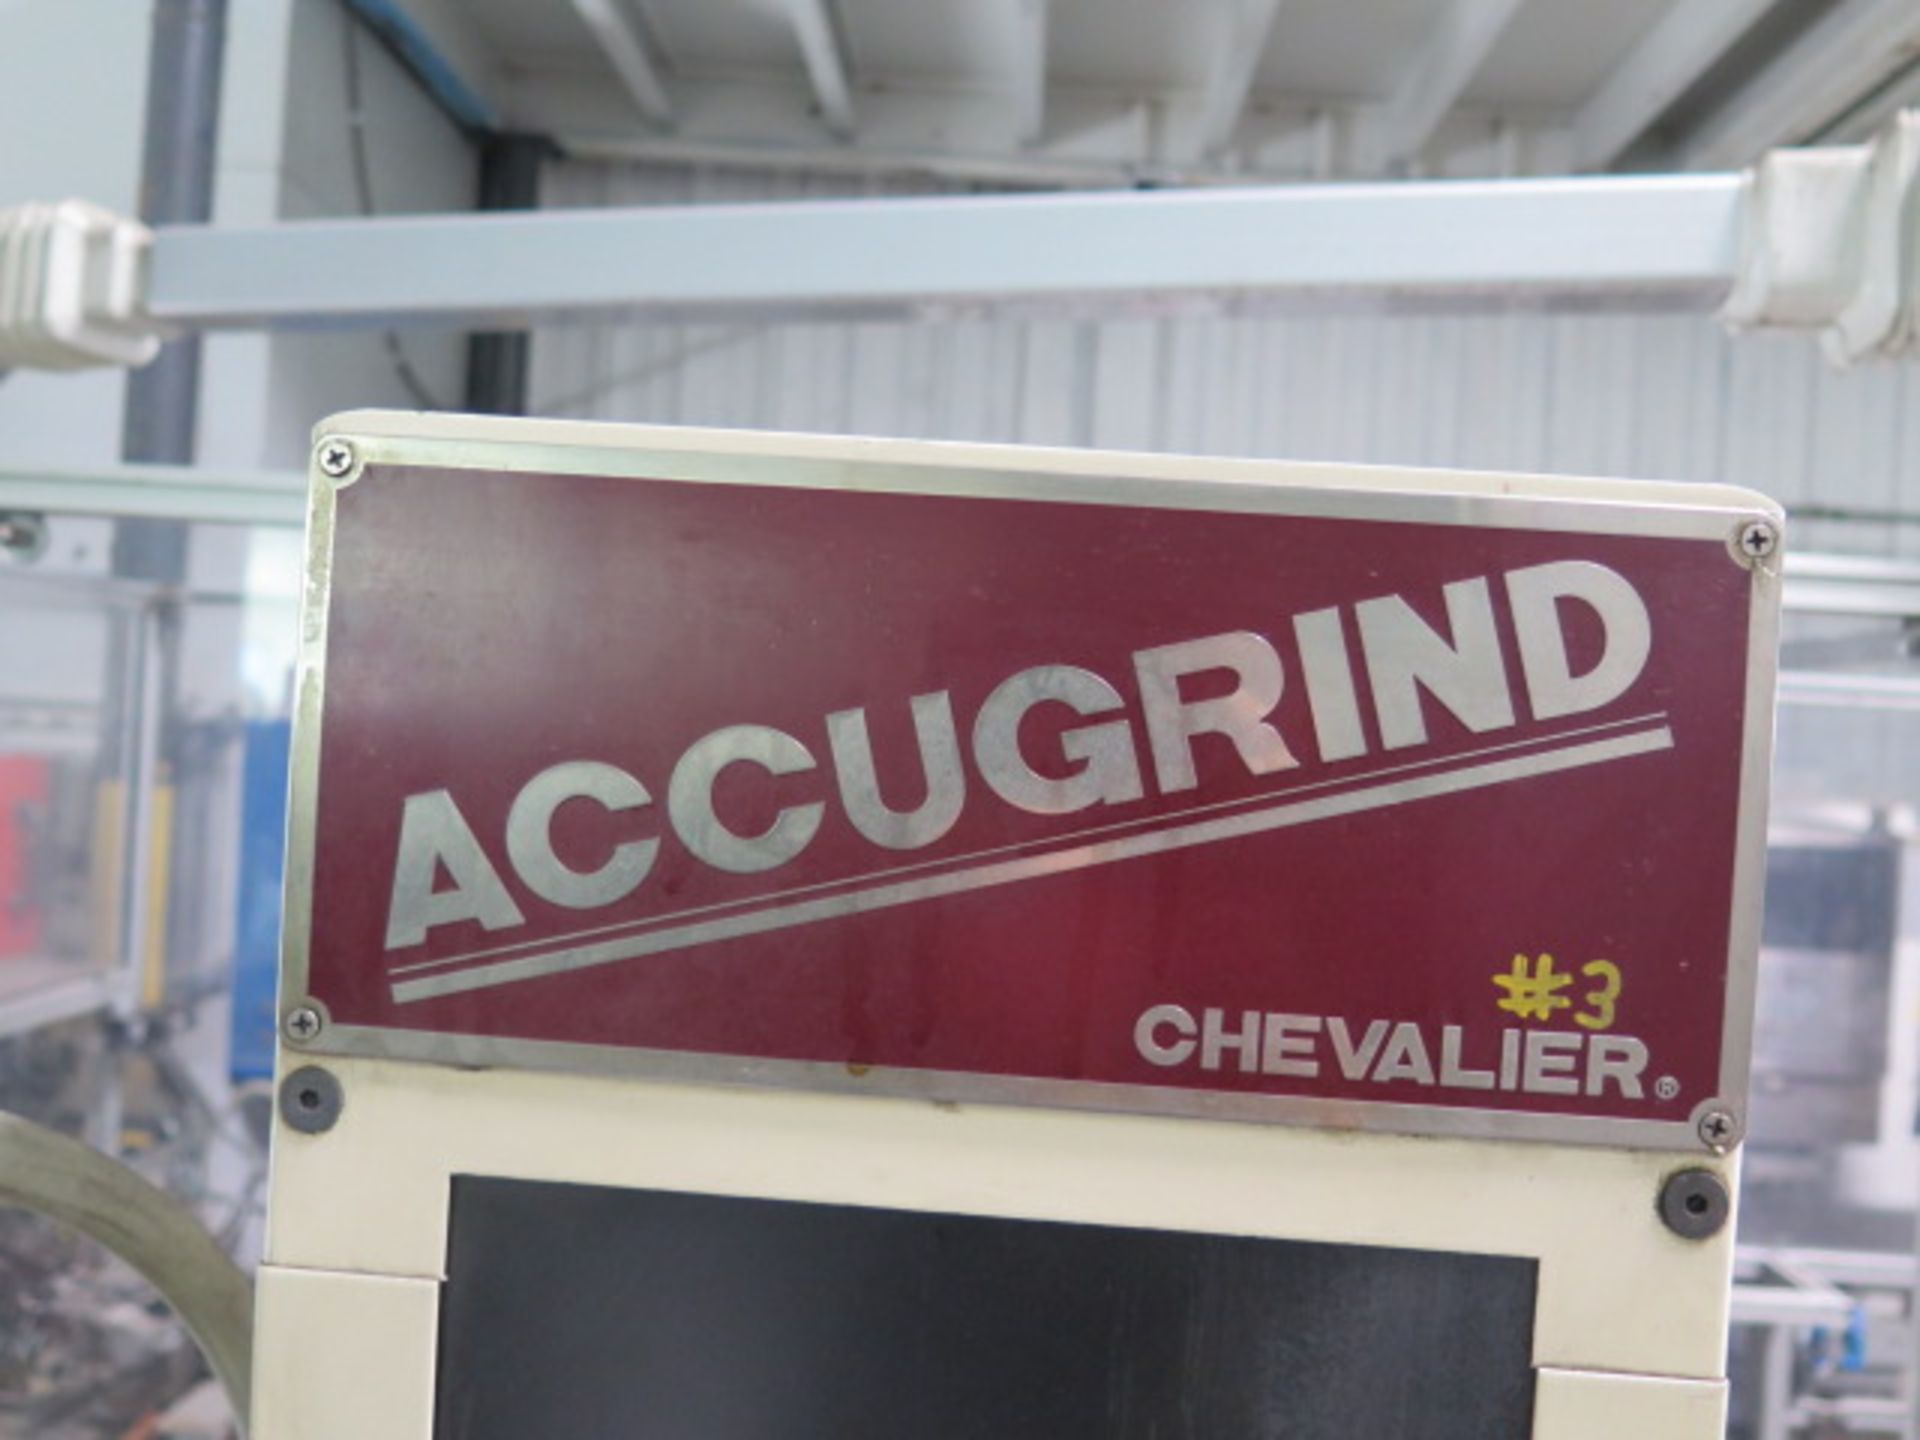 Chevalier Accugrind 6” x 12” Surface Grinder s/n A5865006 w/ Sony DRO, 0.00005 Increment, SOLD AS IS - Image 15 of 15